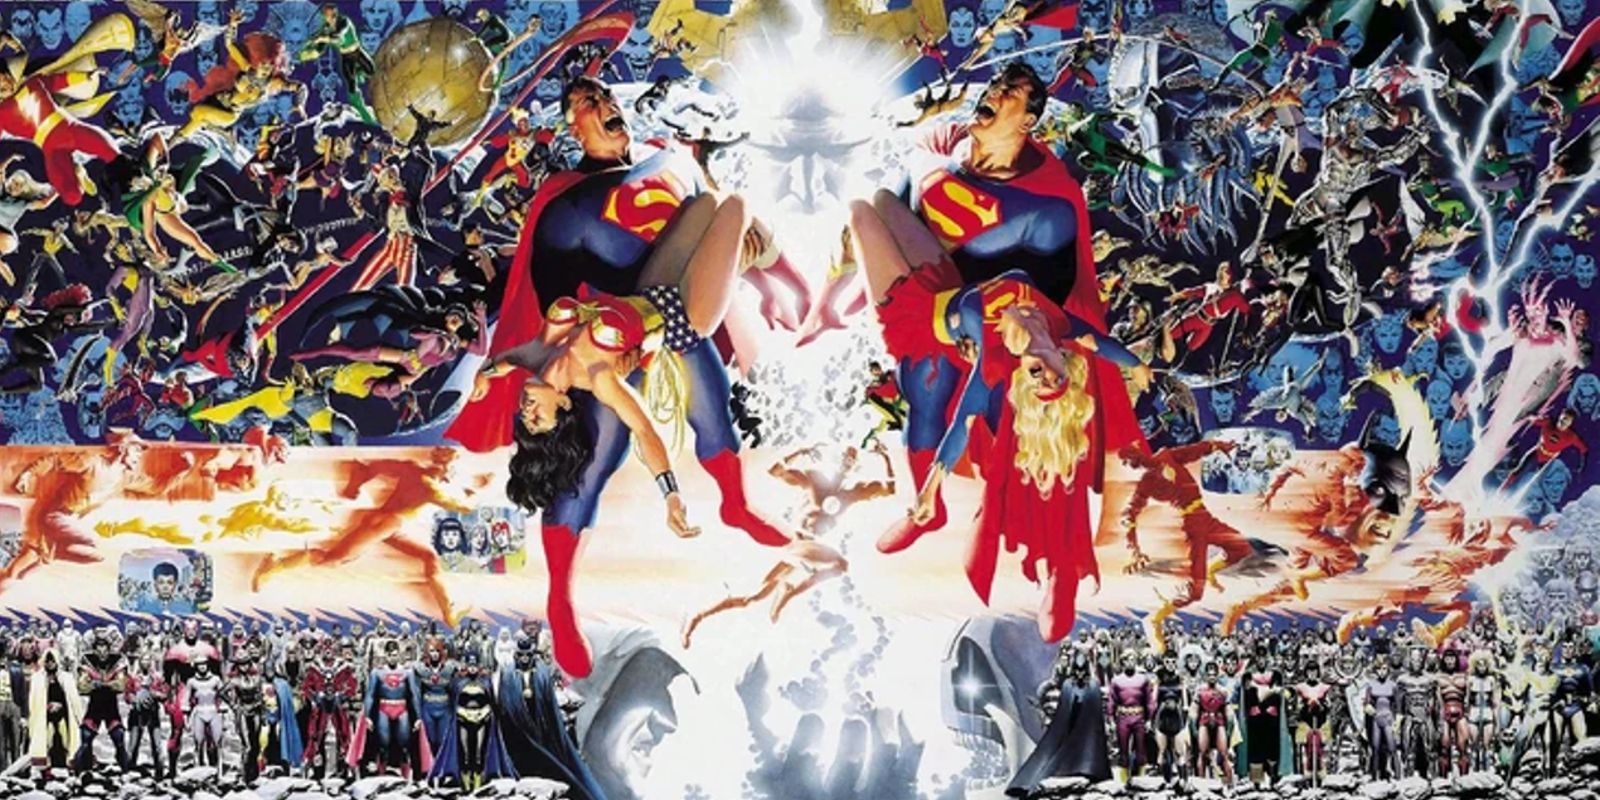 Crisis on Infinite Earths, Superman holding Supergirl's body, in DC Comics 